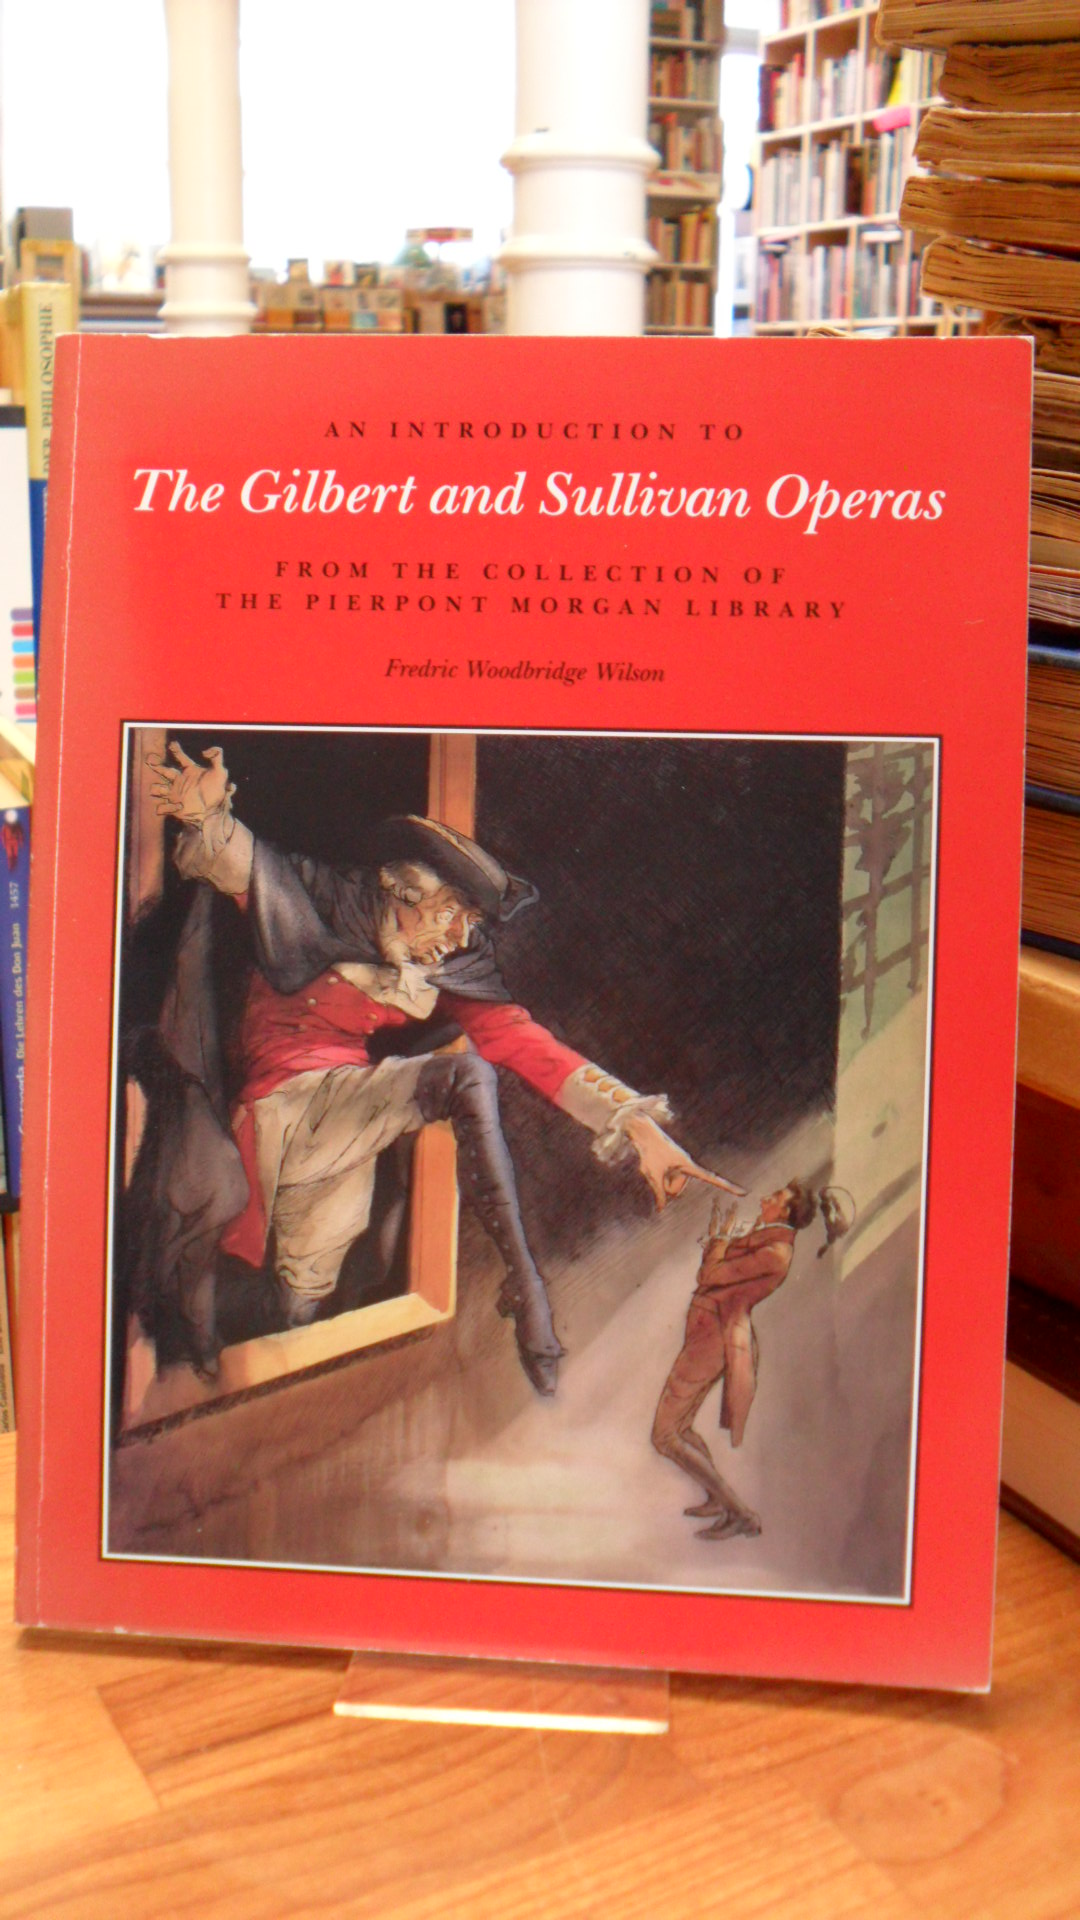 An introduction to the Gilbert and Sullivan operas from the collection of the Pi